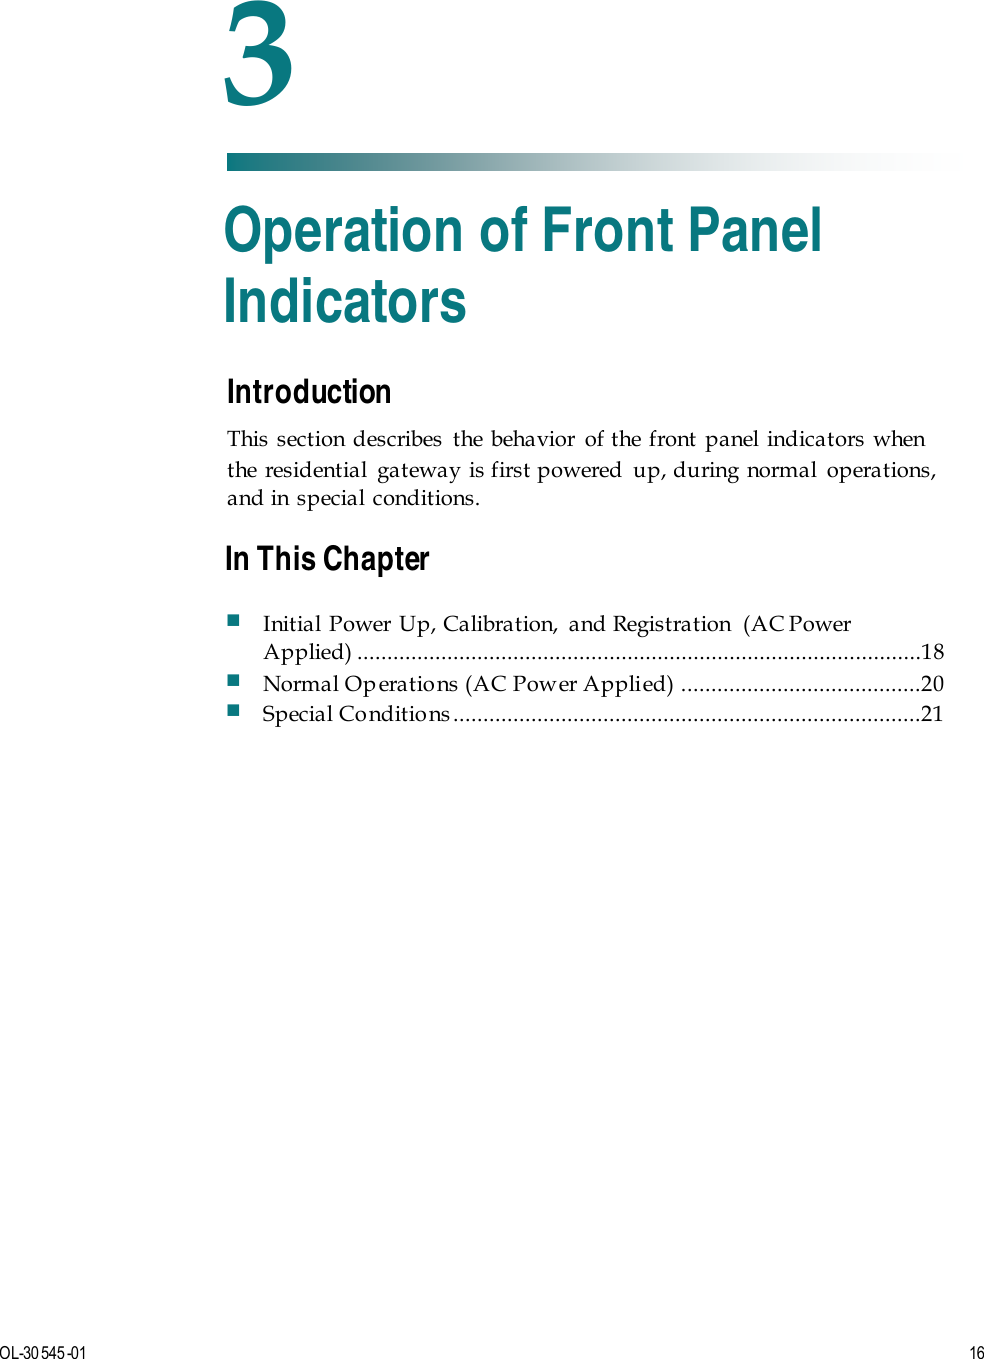   OL-30 545-01  16  Introduction This section describes the behavior of the front panel indicators when the residential  gateway is first powered  up, during normal  operations, and in special conditions.    3 Chapter 3 Operation of Front Panel Indicators In This Chapter  Initial Power Up, Calibration,  and Registration  (AC Power Applied)  ..............................................................................................18  Normal Op eratio ns (AC Pow er Appli ed)  ........................................20  Special Conditio ns ..............................................................................21 